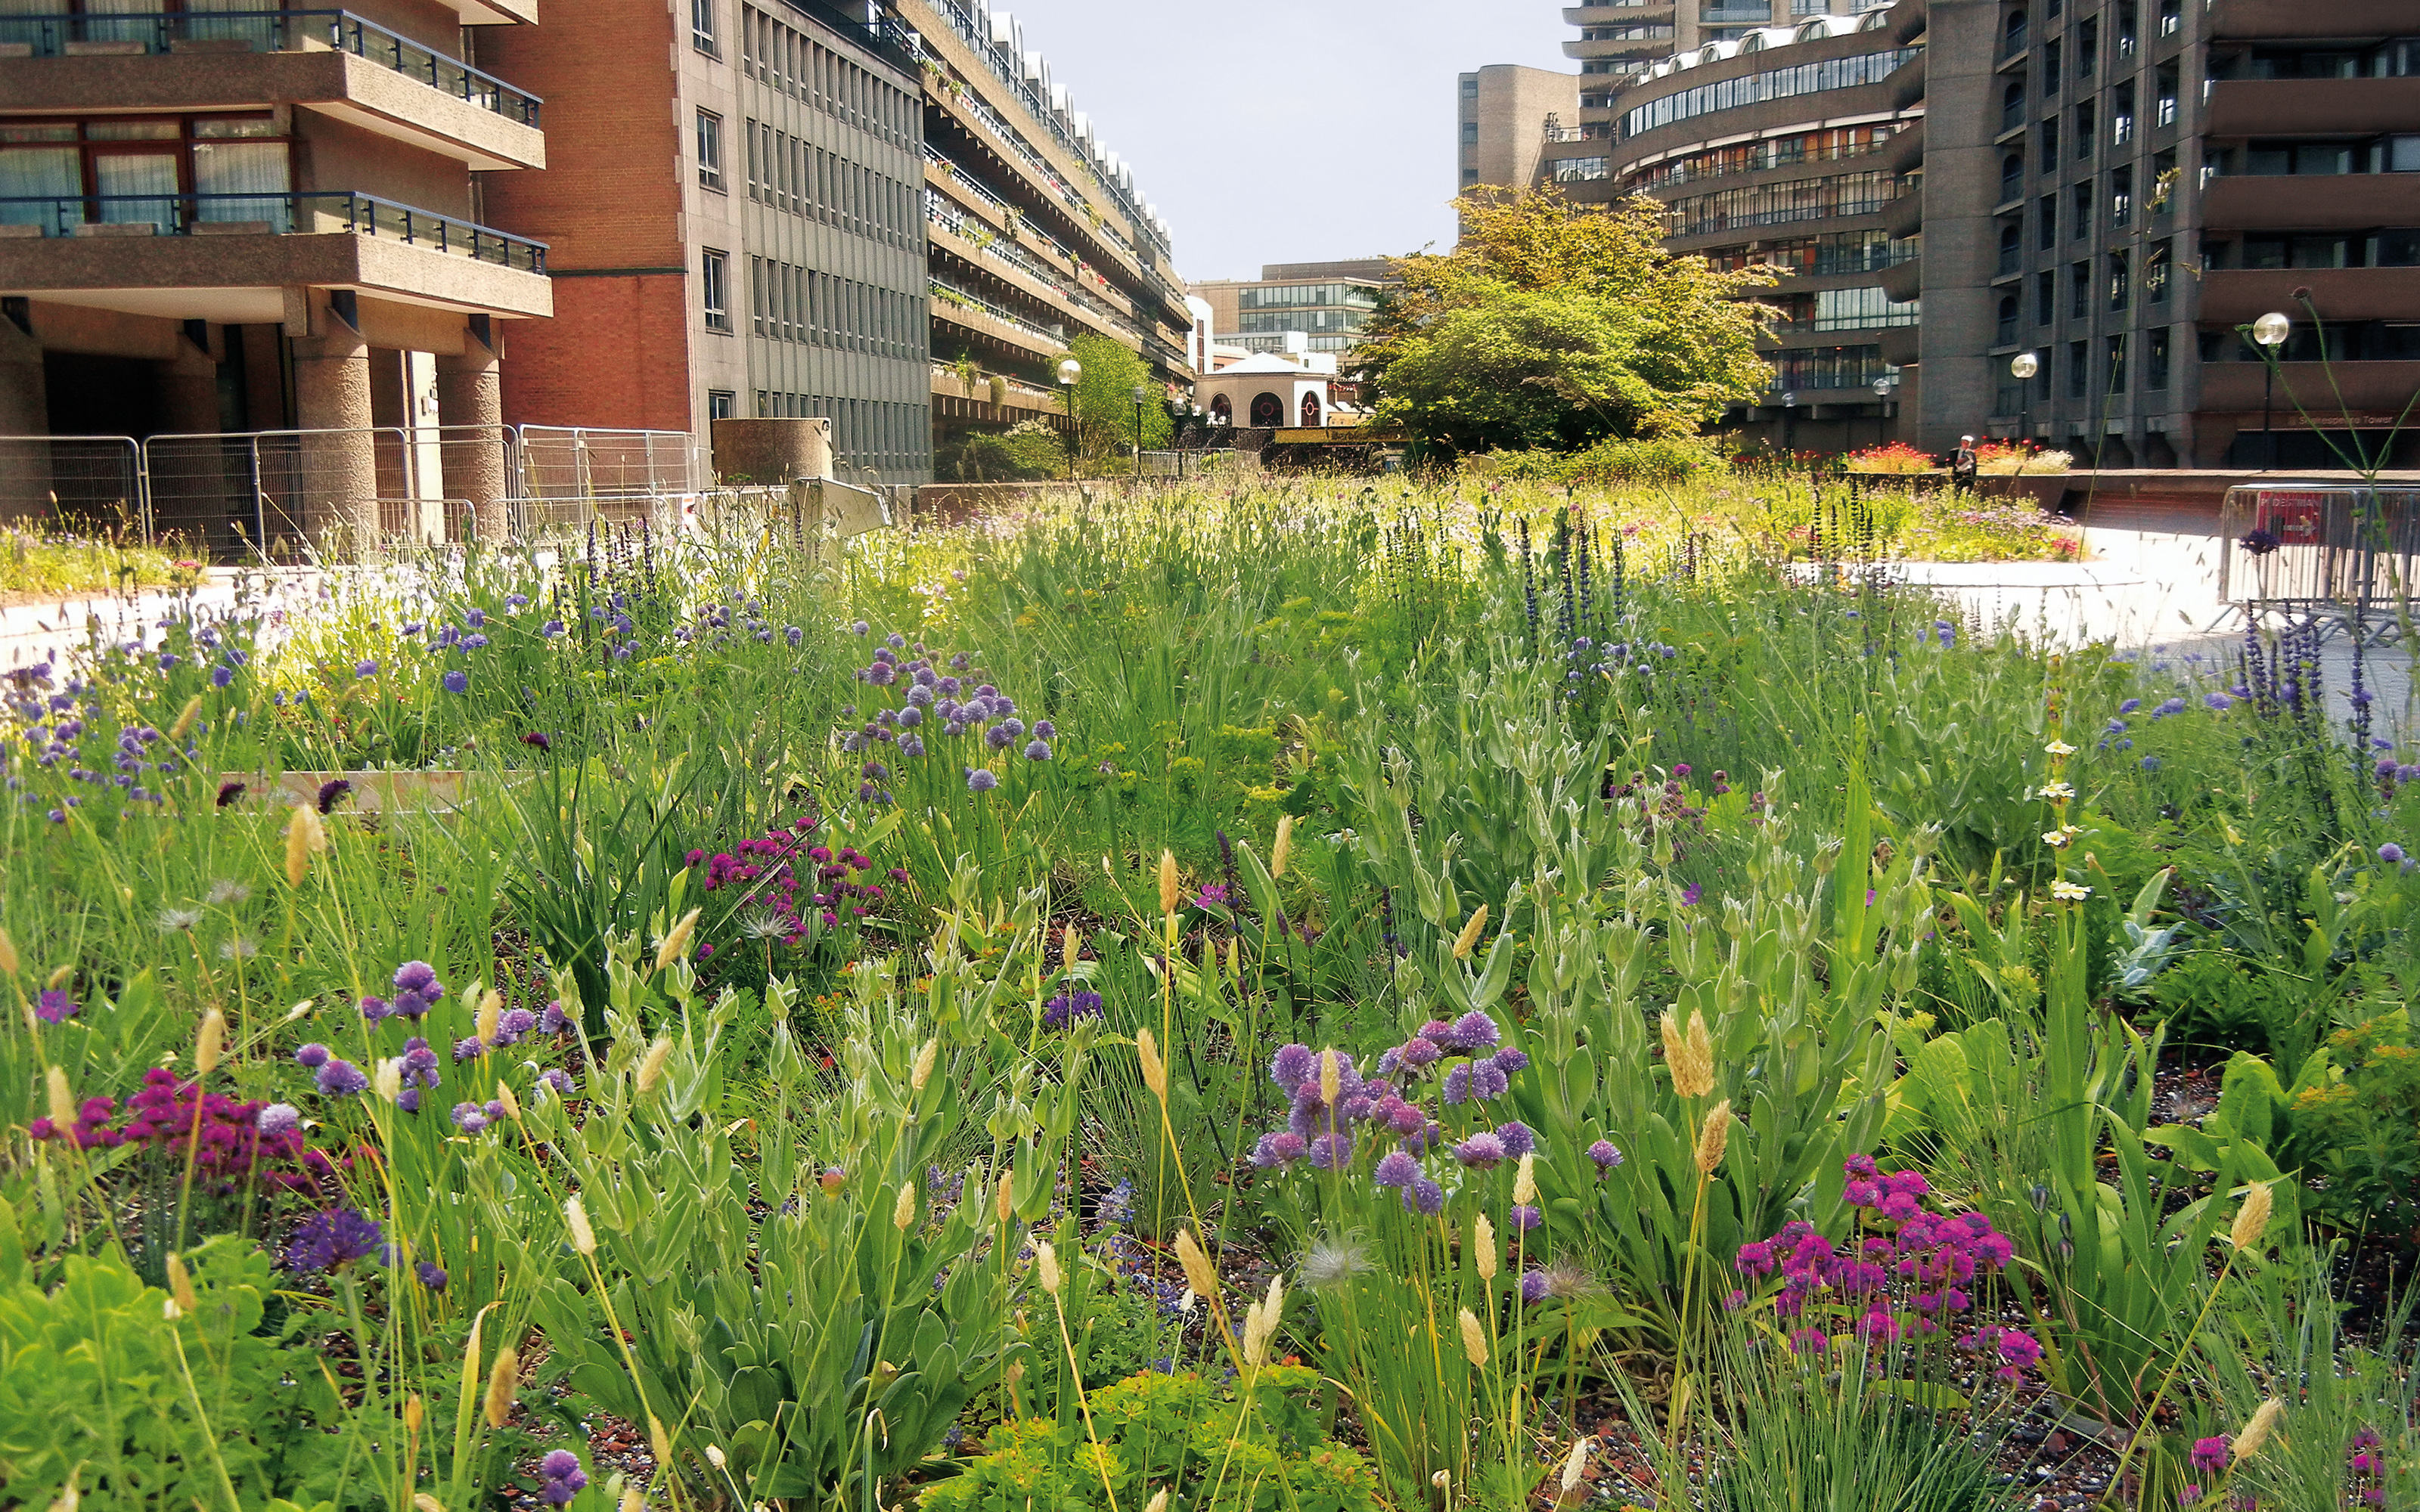 Flowering meadow surrounded by buildings